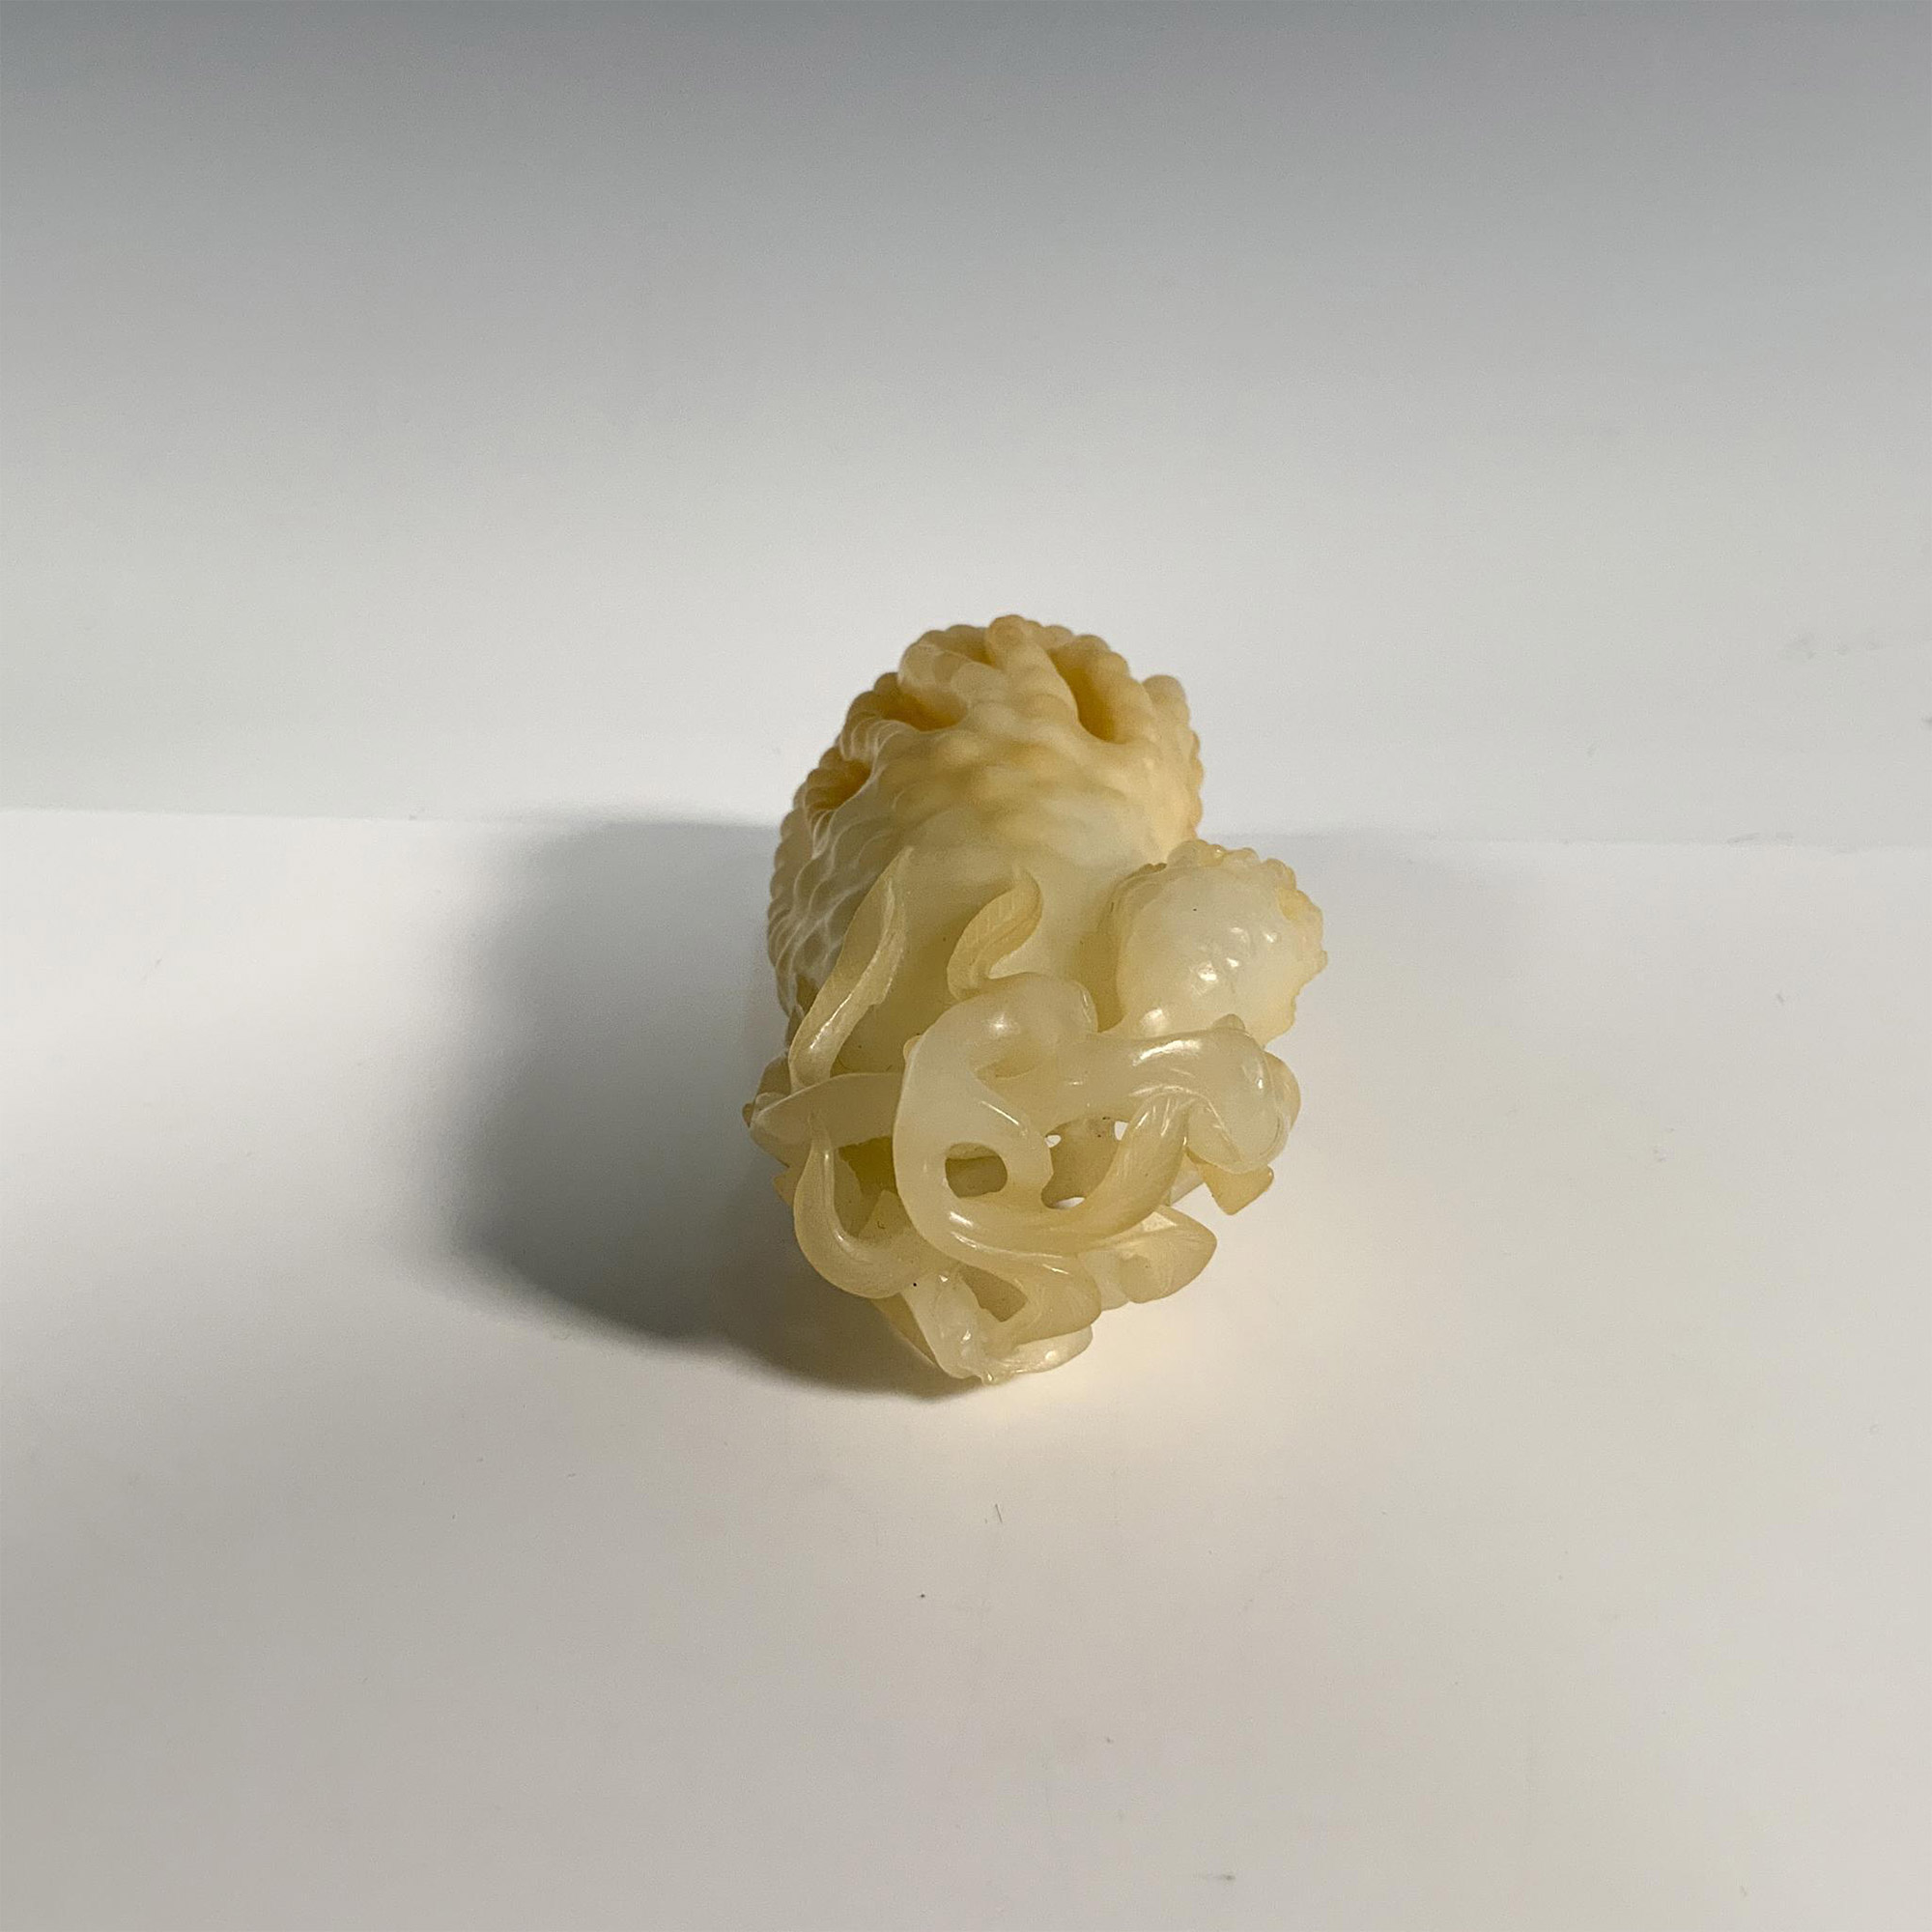 Chinese Yellow Jade Fingered Citron Ornament - Image 3 of 3